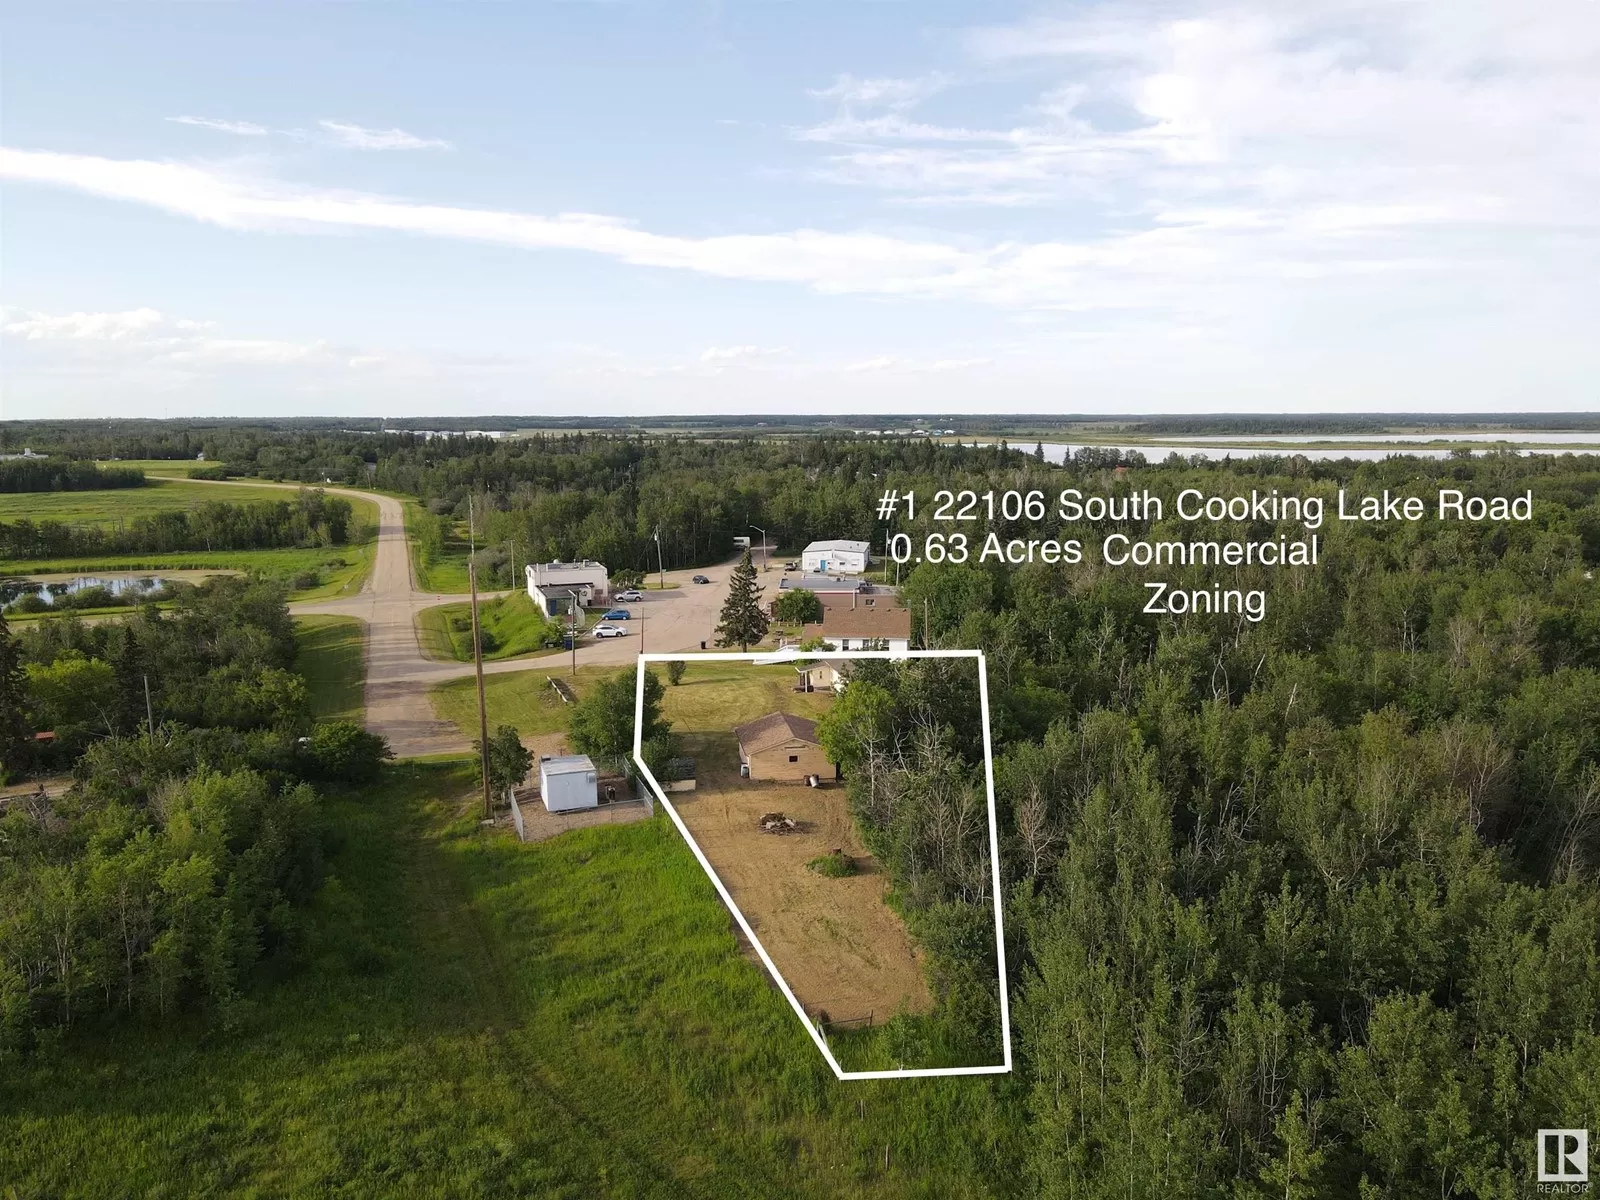 No Building for rent: #1 22106 South Cooking Lake Rd, Rural Strathcona County, Alberta T8E 0Y0